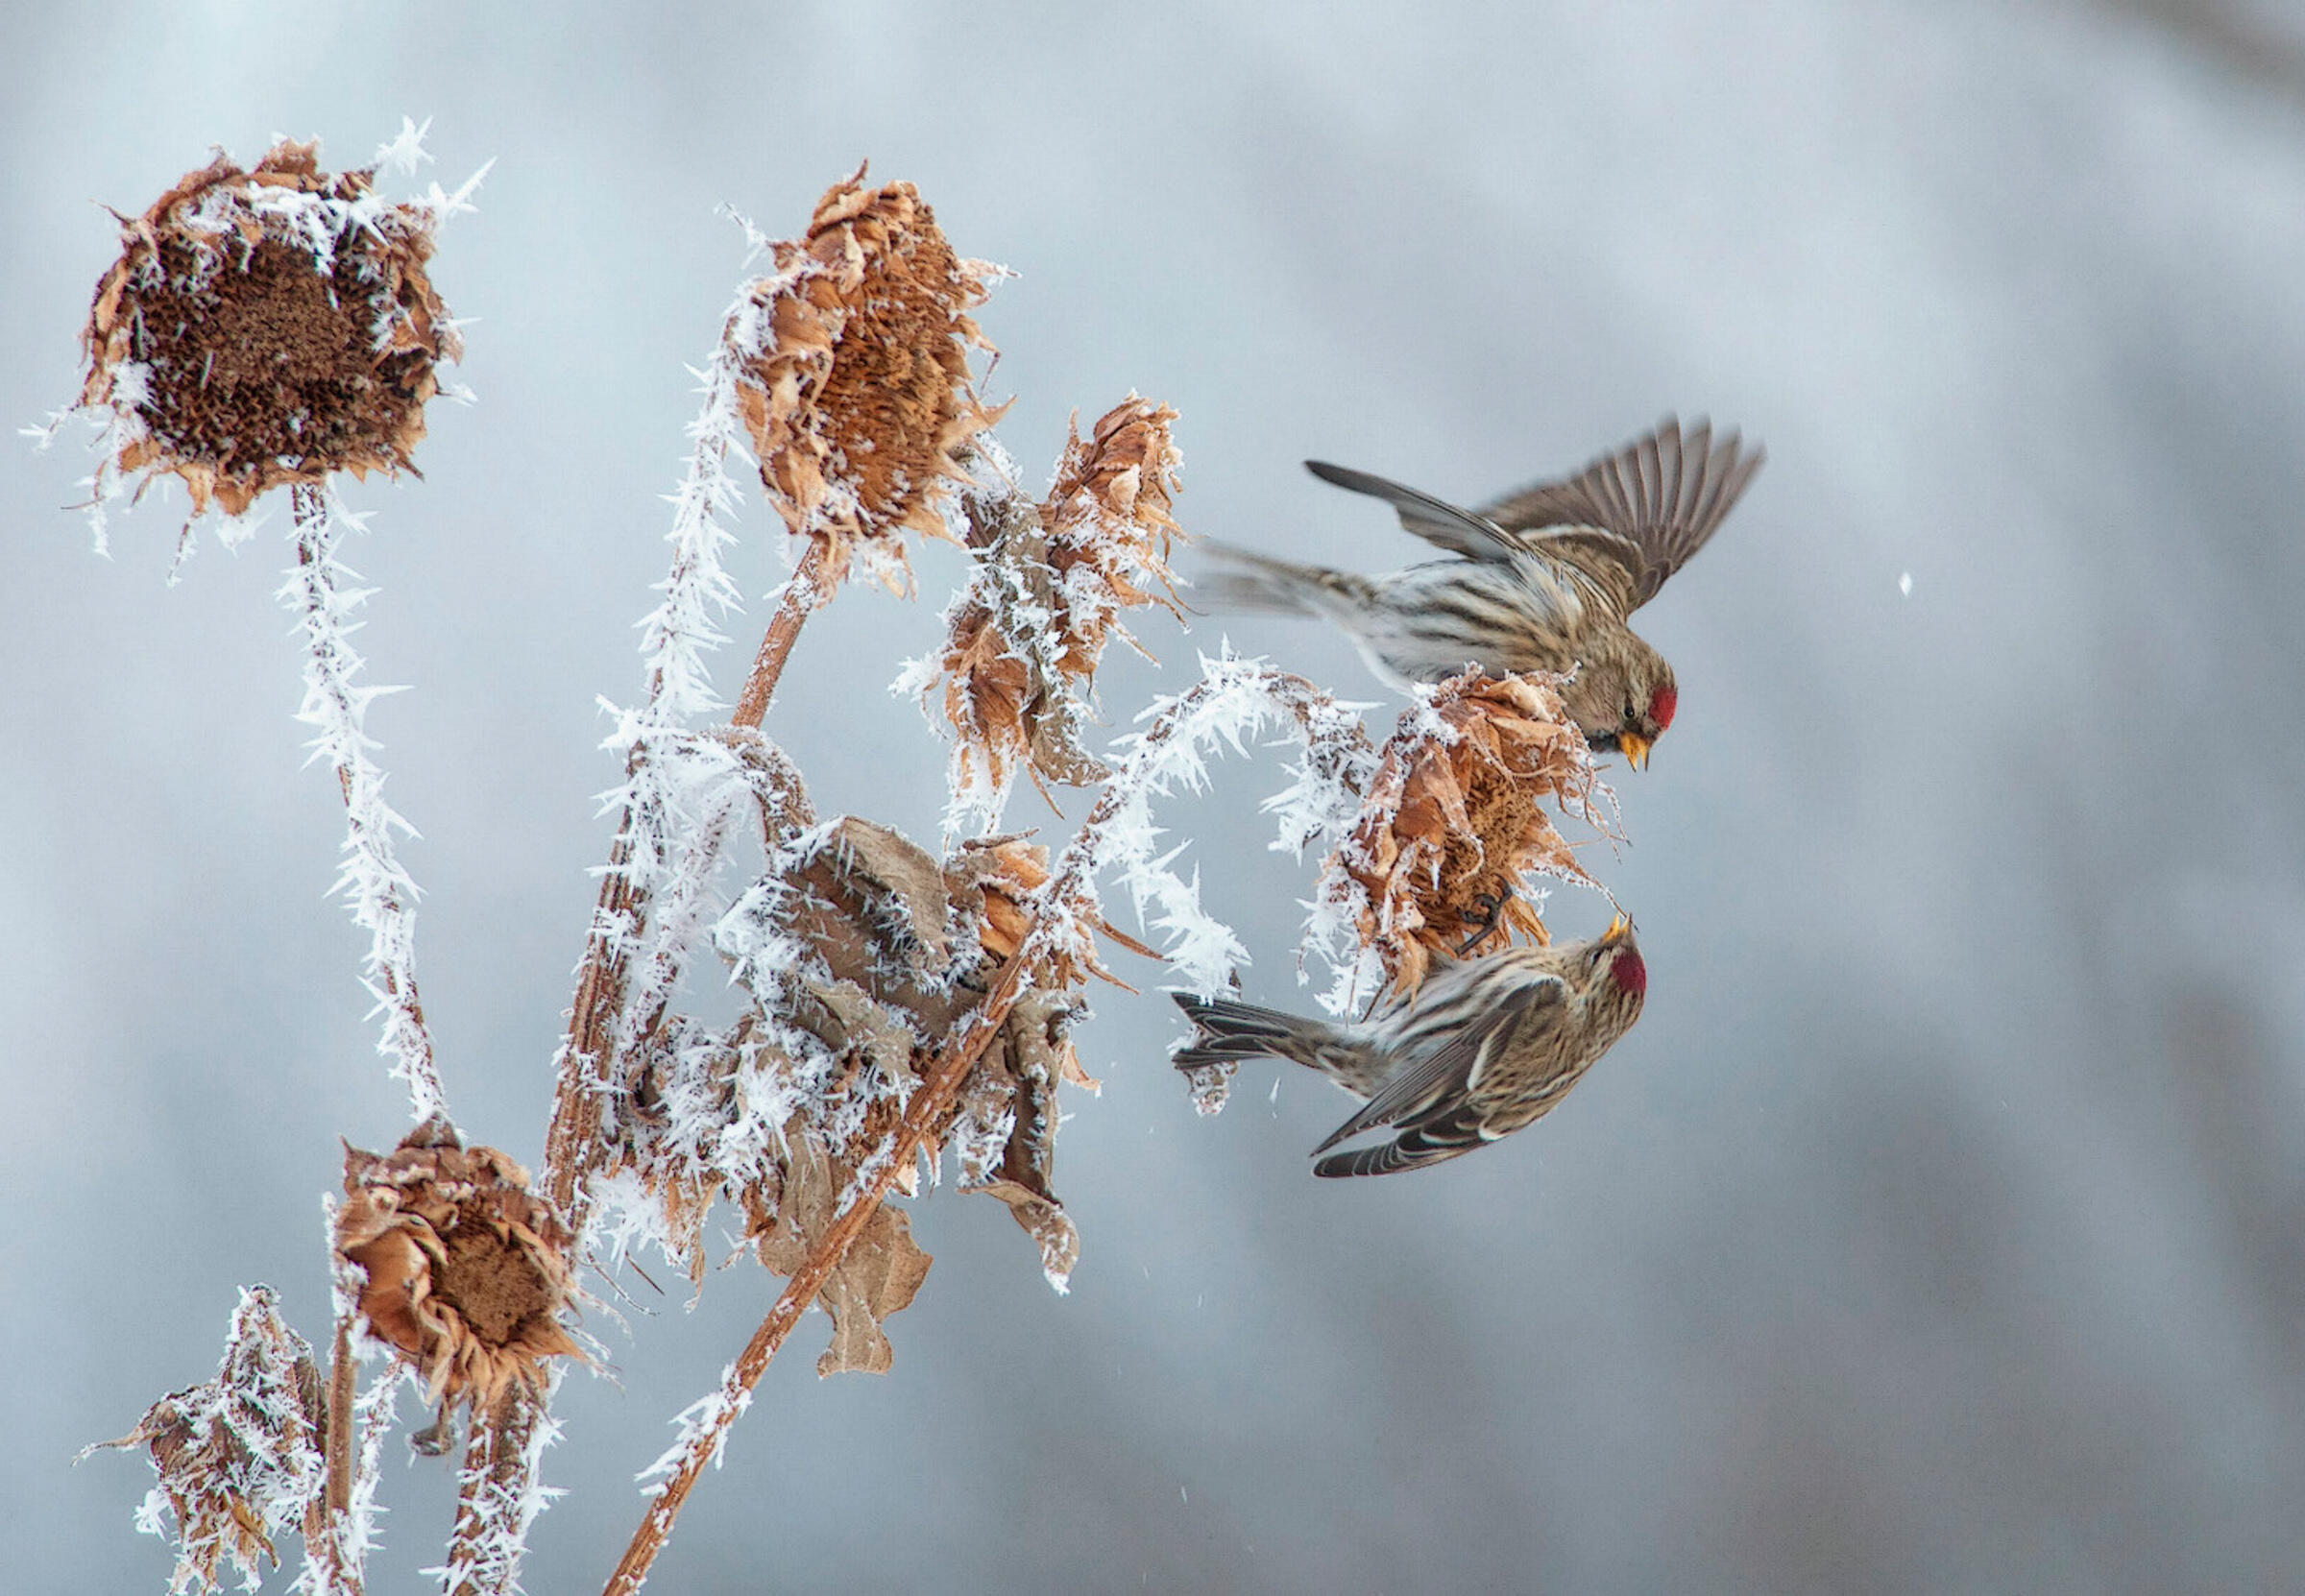 Two Common Redpolls fly around a frozen sunflower seed head.